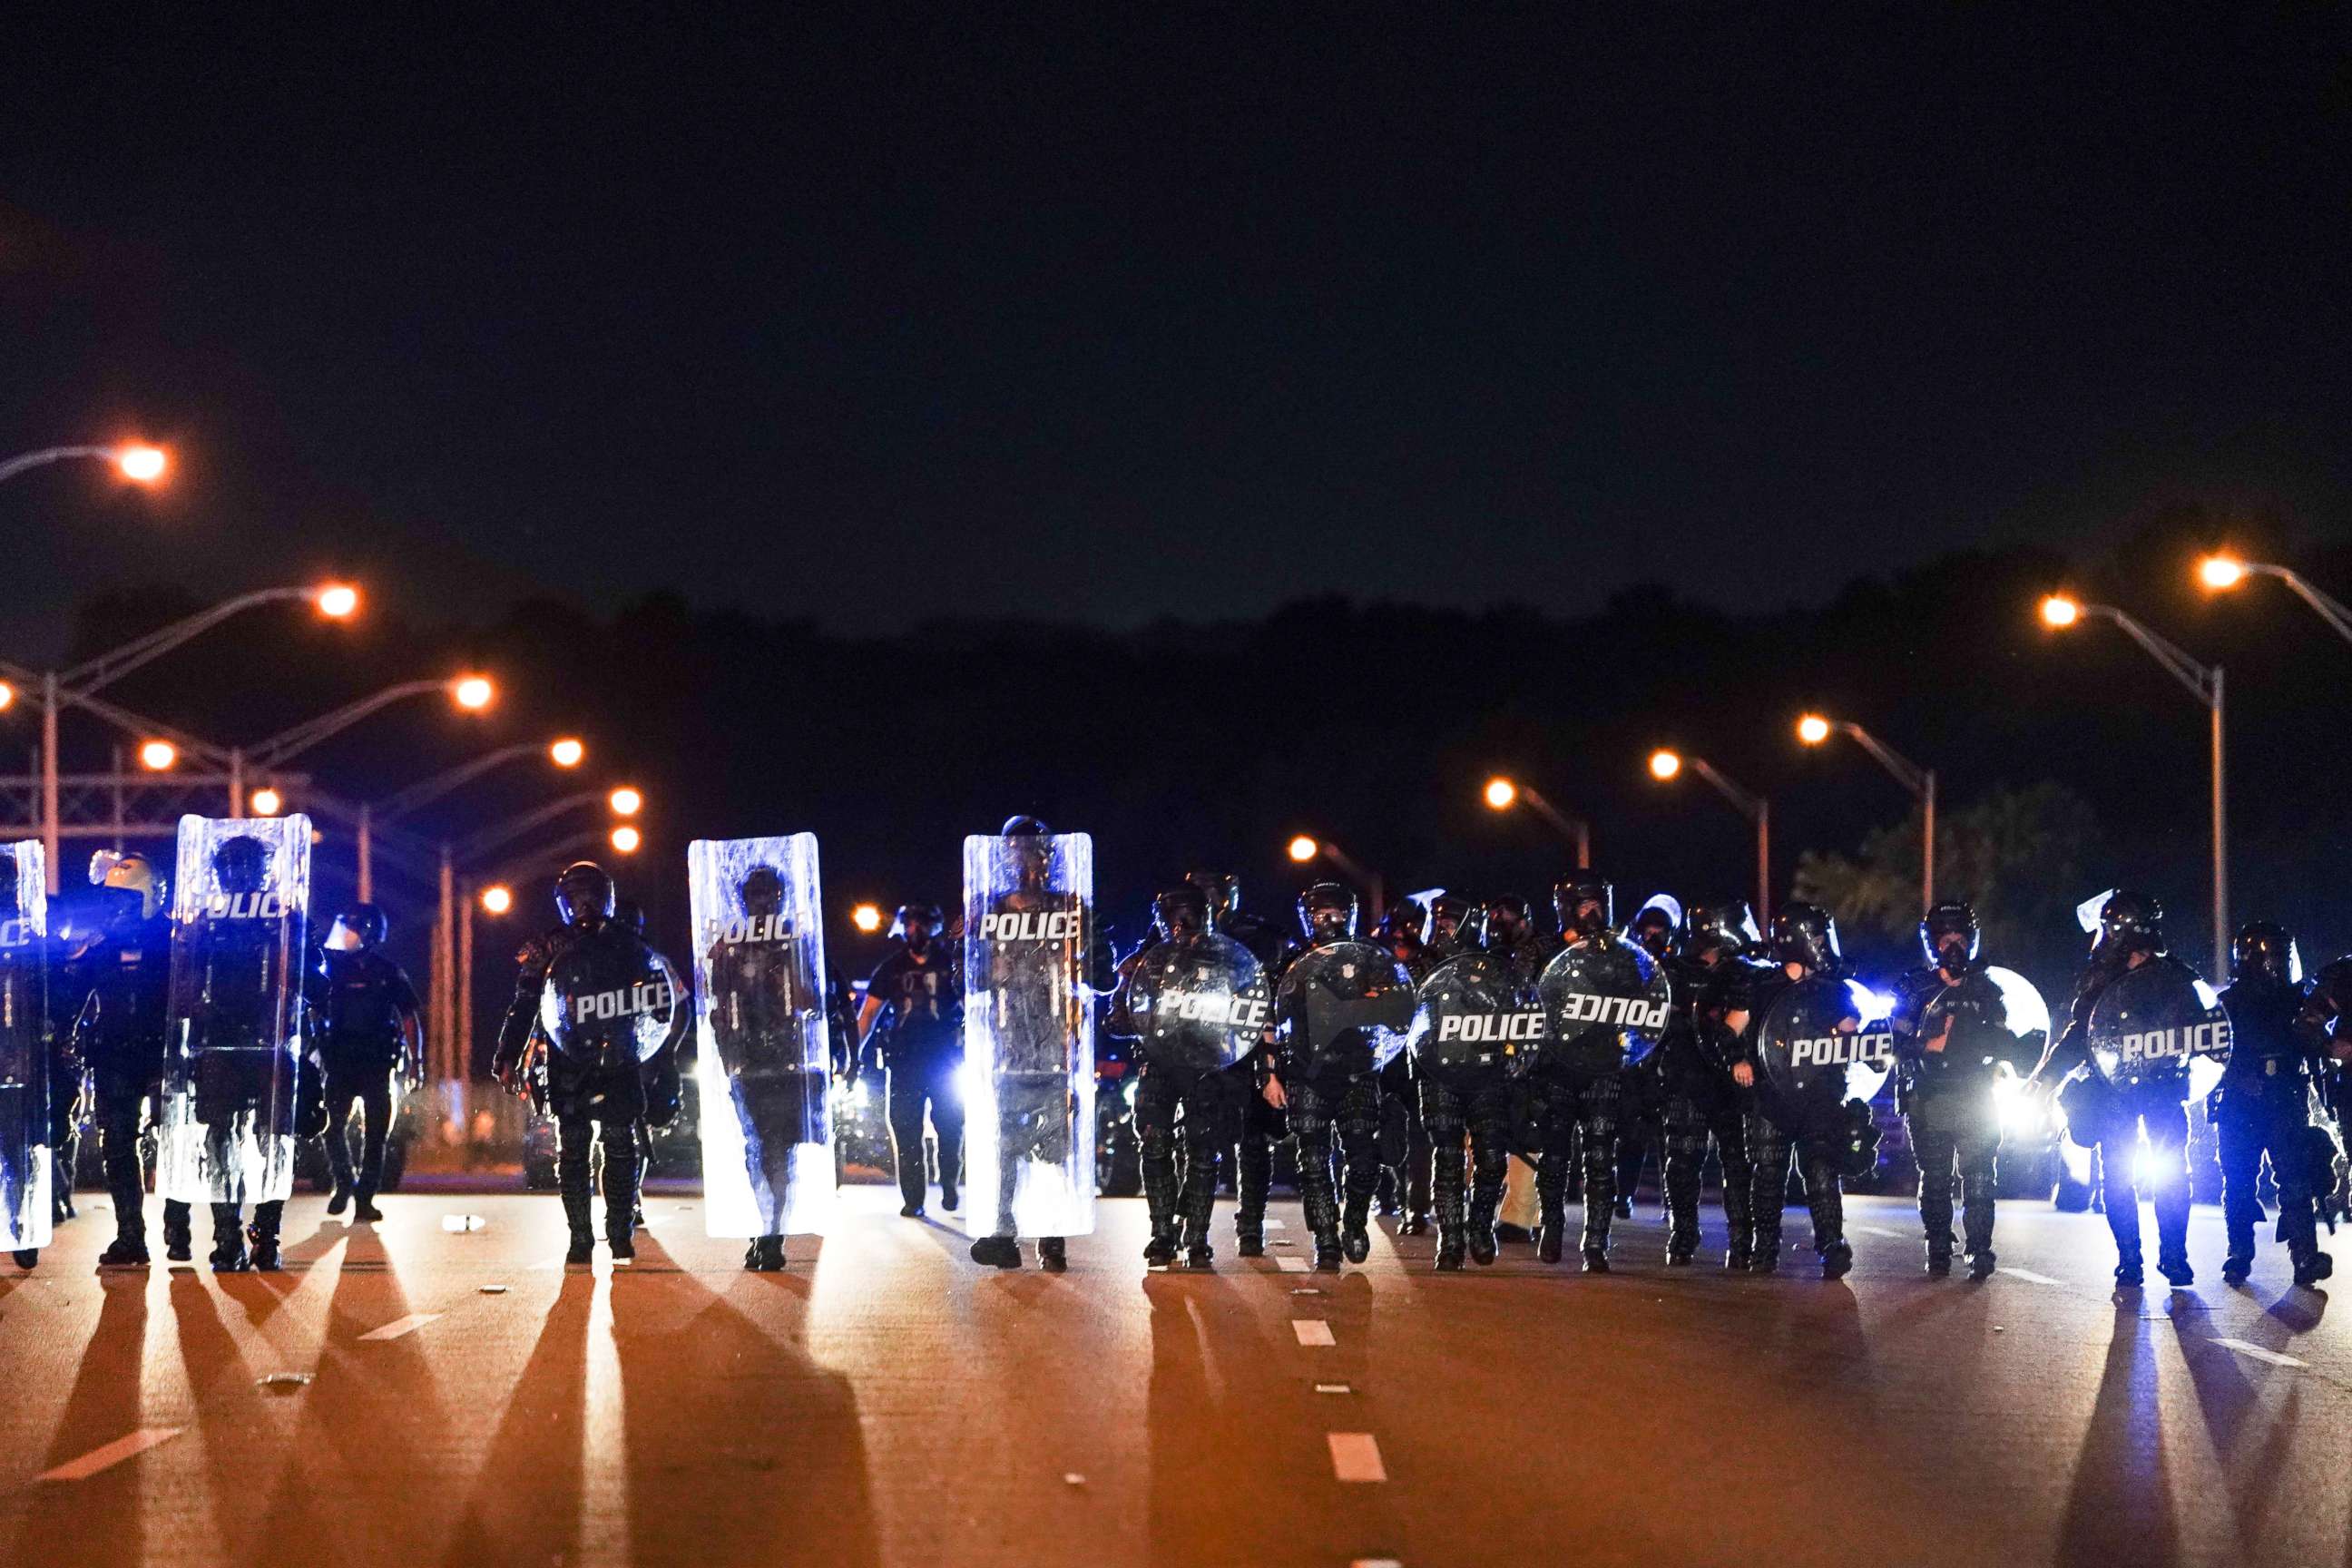 PHOTO: Police with riot shields advance to detain protesters for blocking traffic on a freeway, during a rally against racial inequality and the police shooting death of Rayshard Brooks, in Atlanta, Georgia, on June 13, 2020.